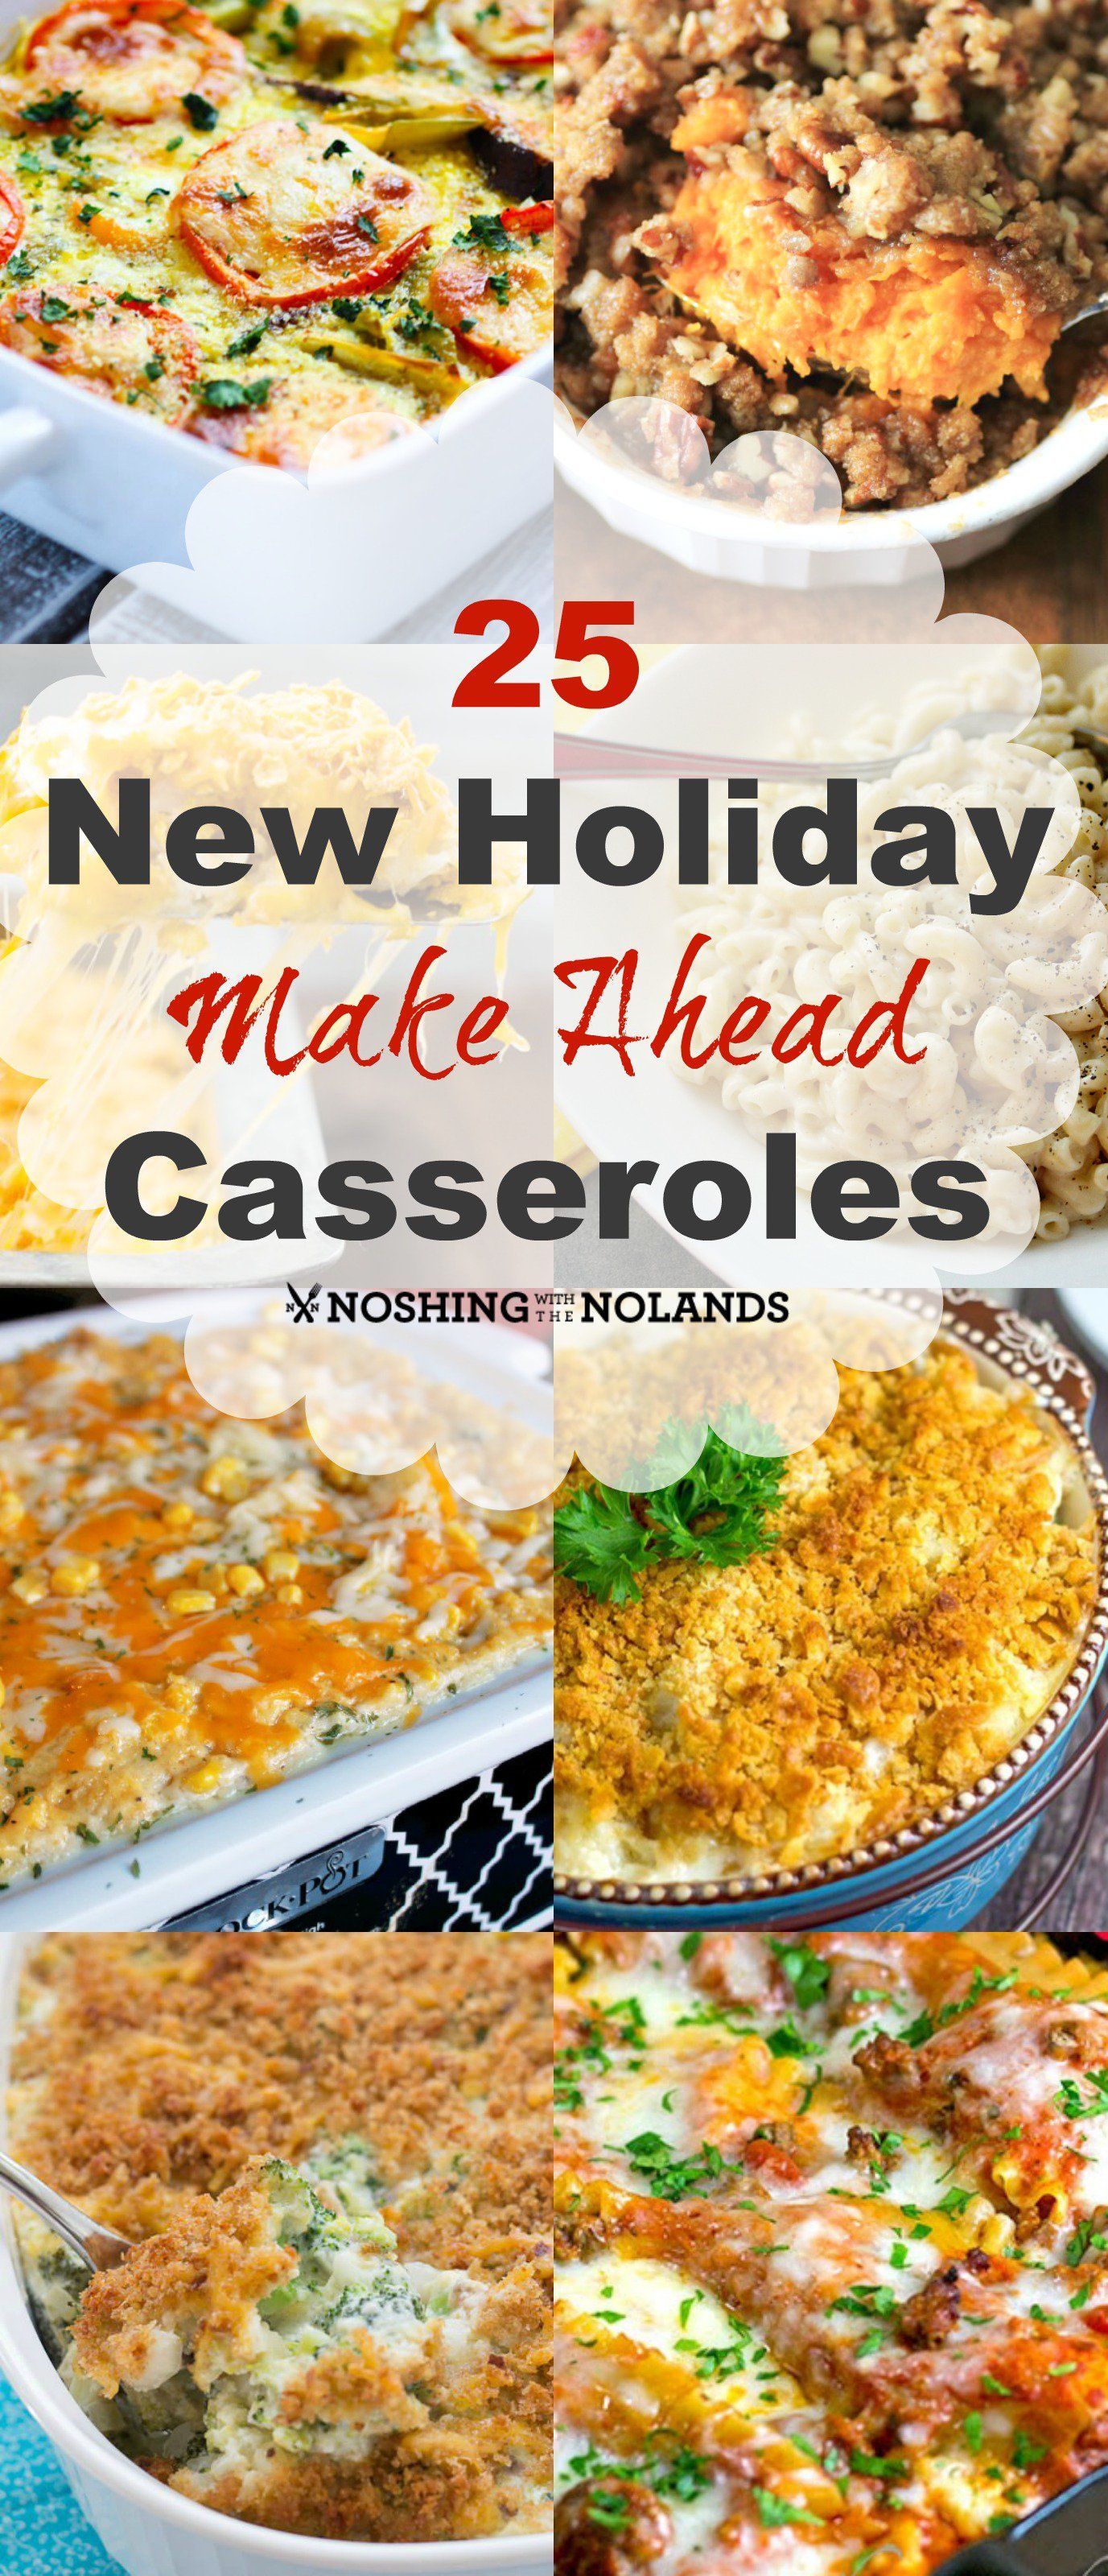 25 New Holiday Make Ahead Casseroles -   19 make ahead sides for thanksgiving ideas